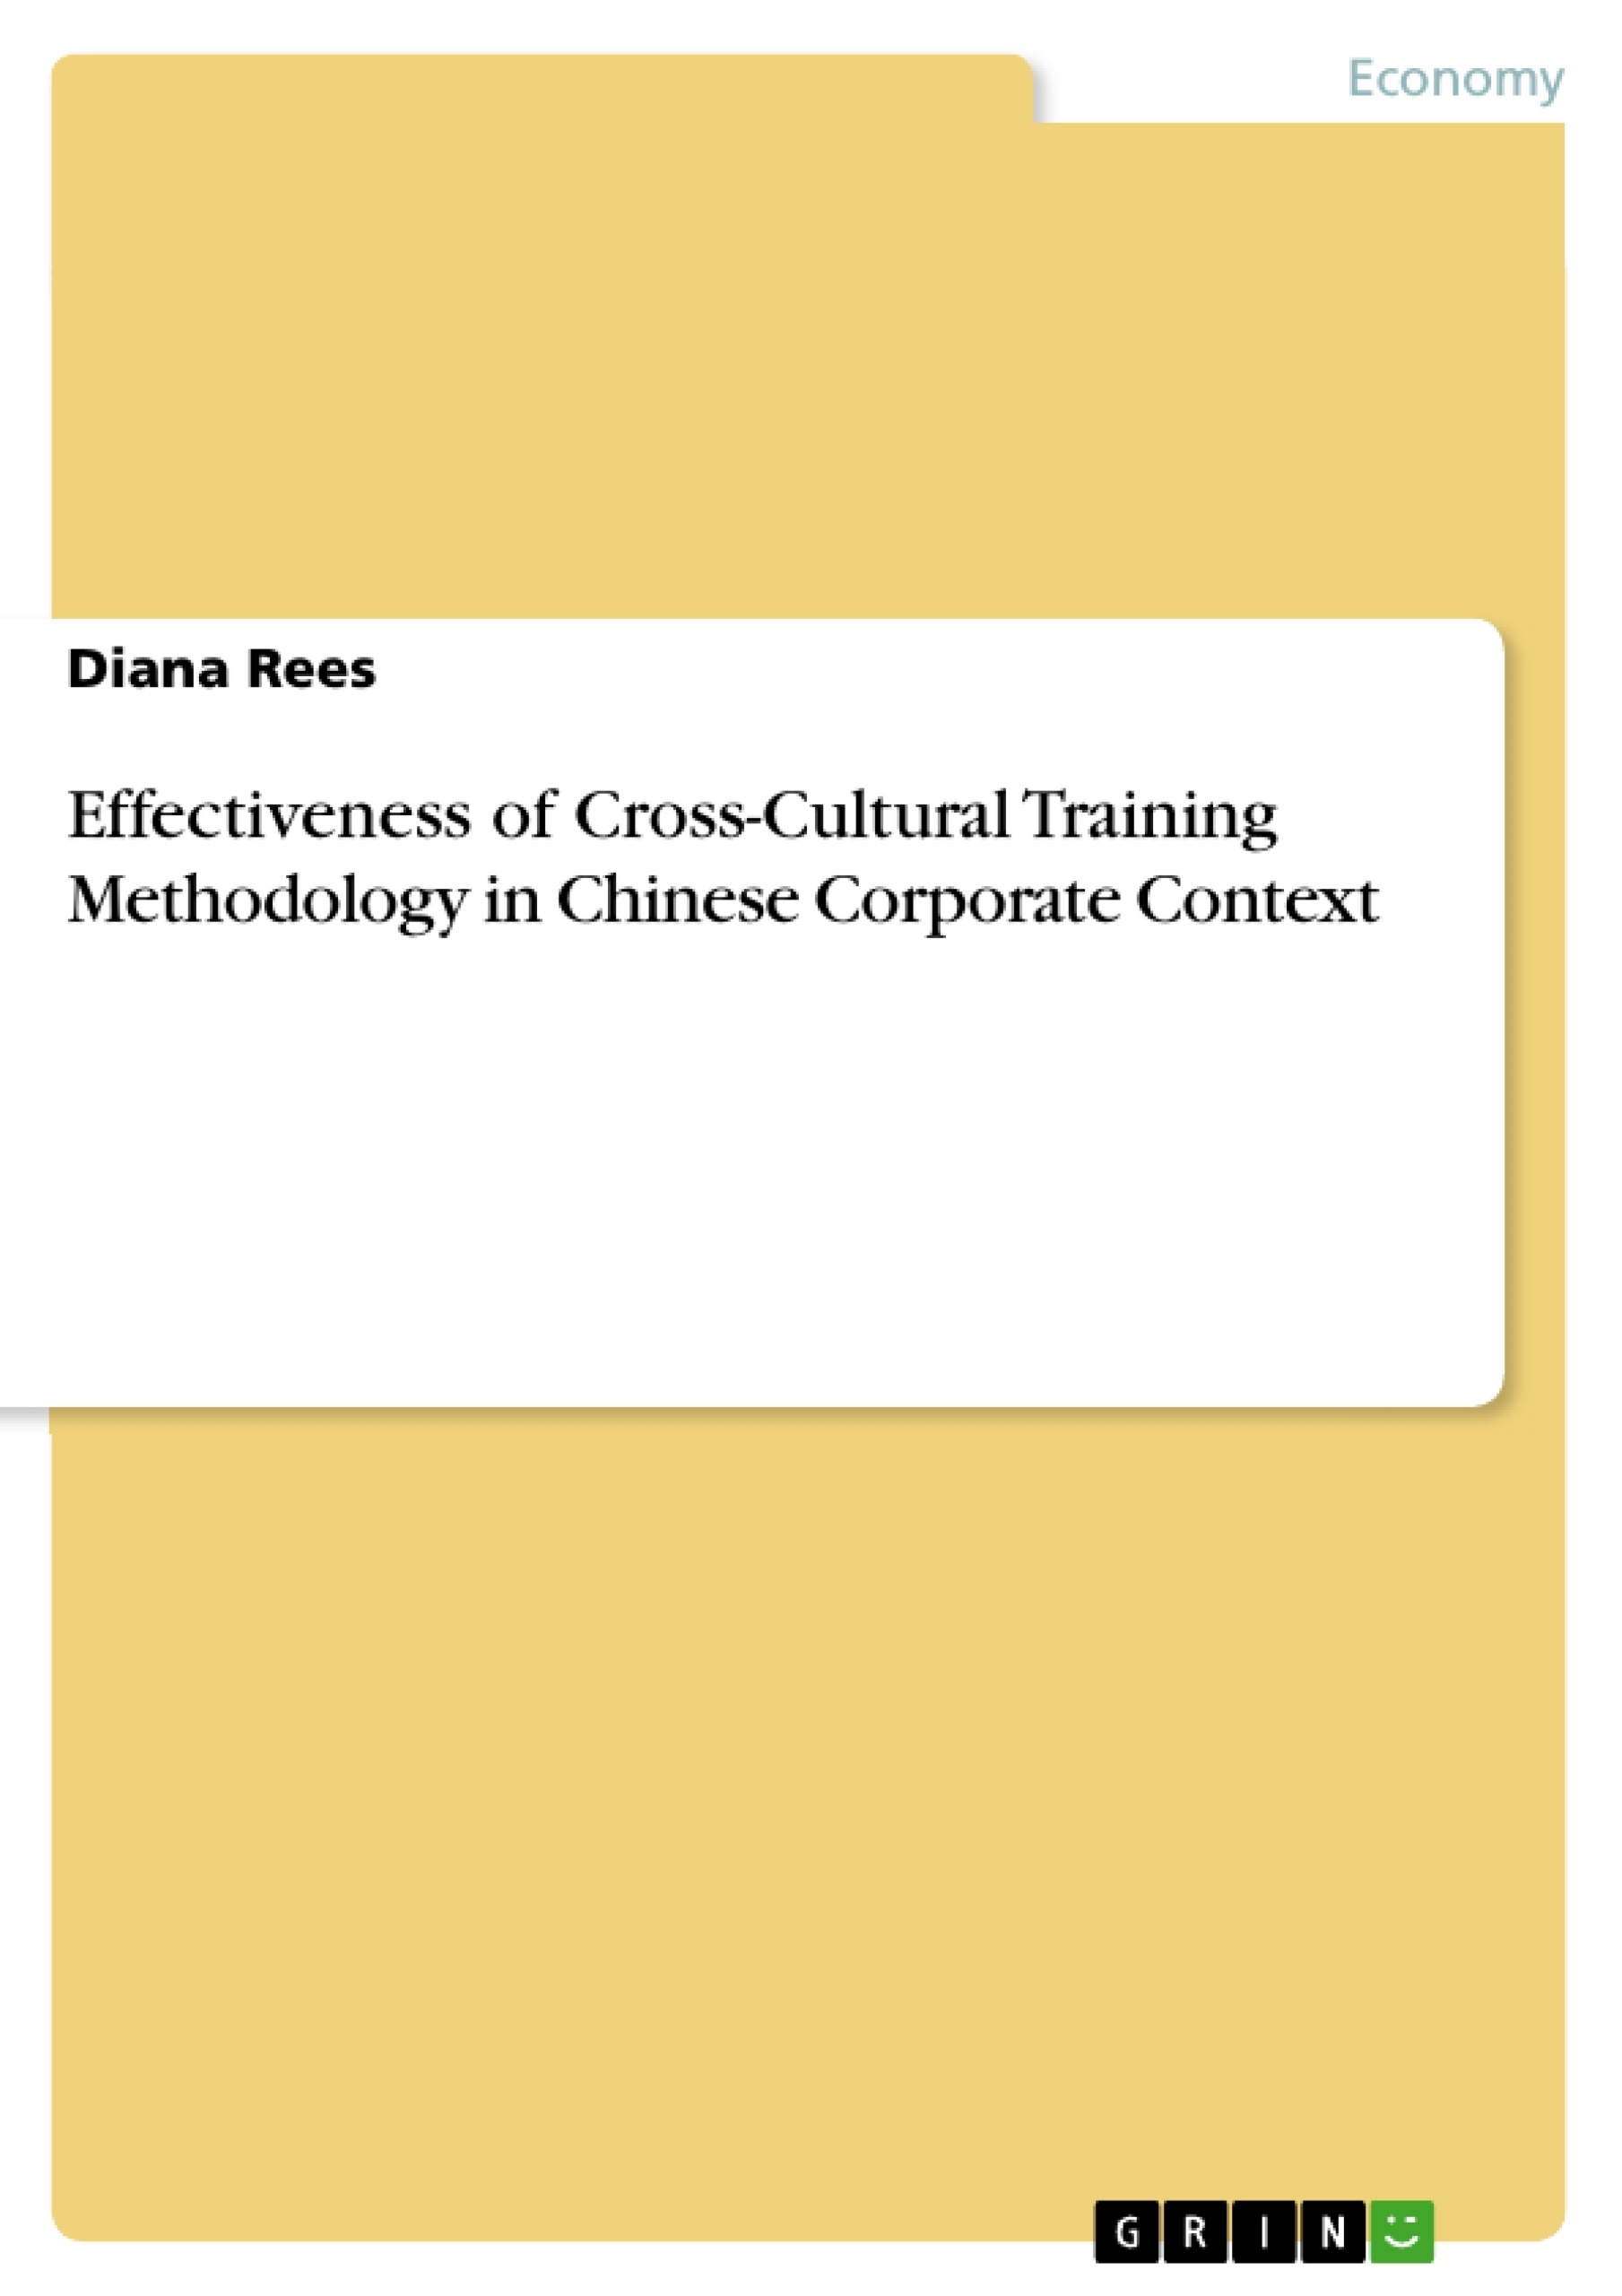 Title: Effectiveness of Cross-Cultural Training Methodology in Chinese Corporate Context